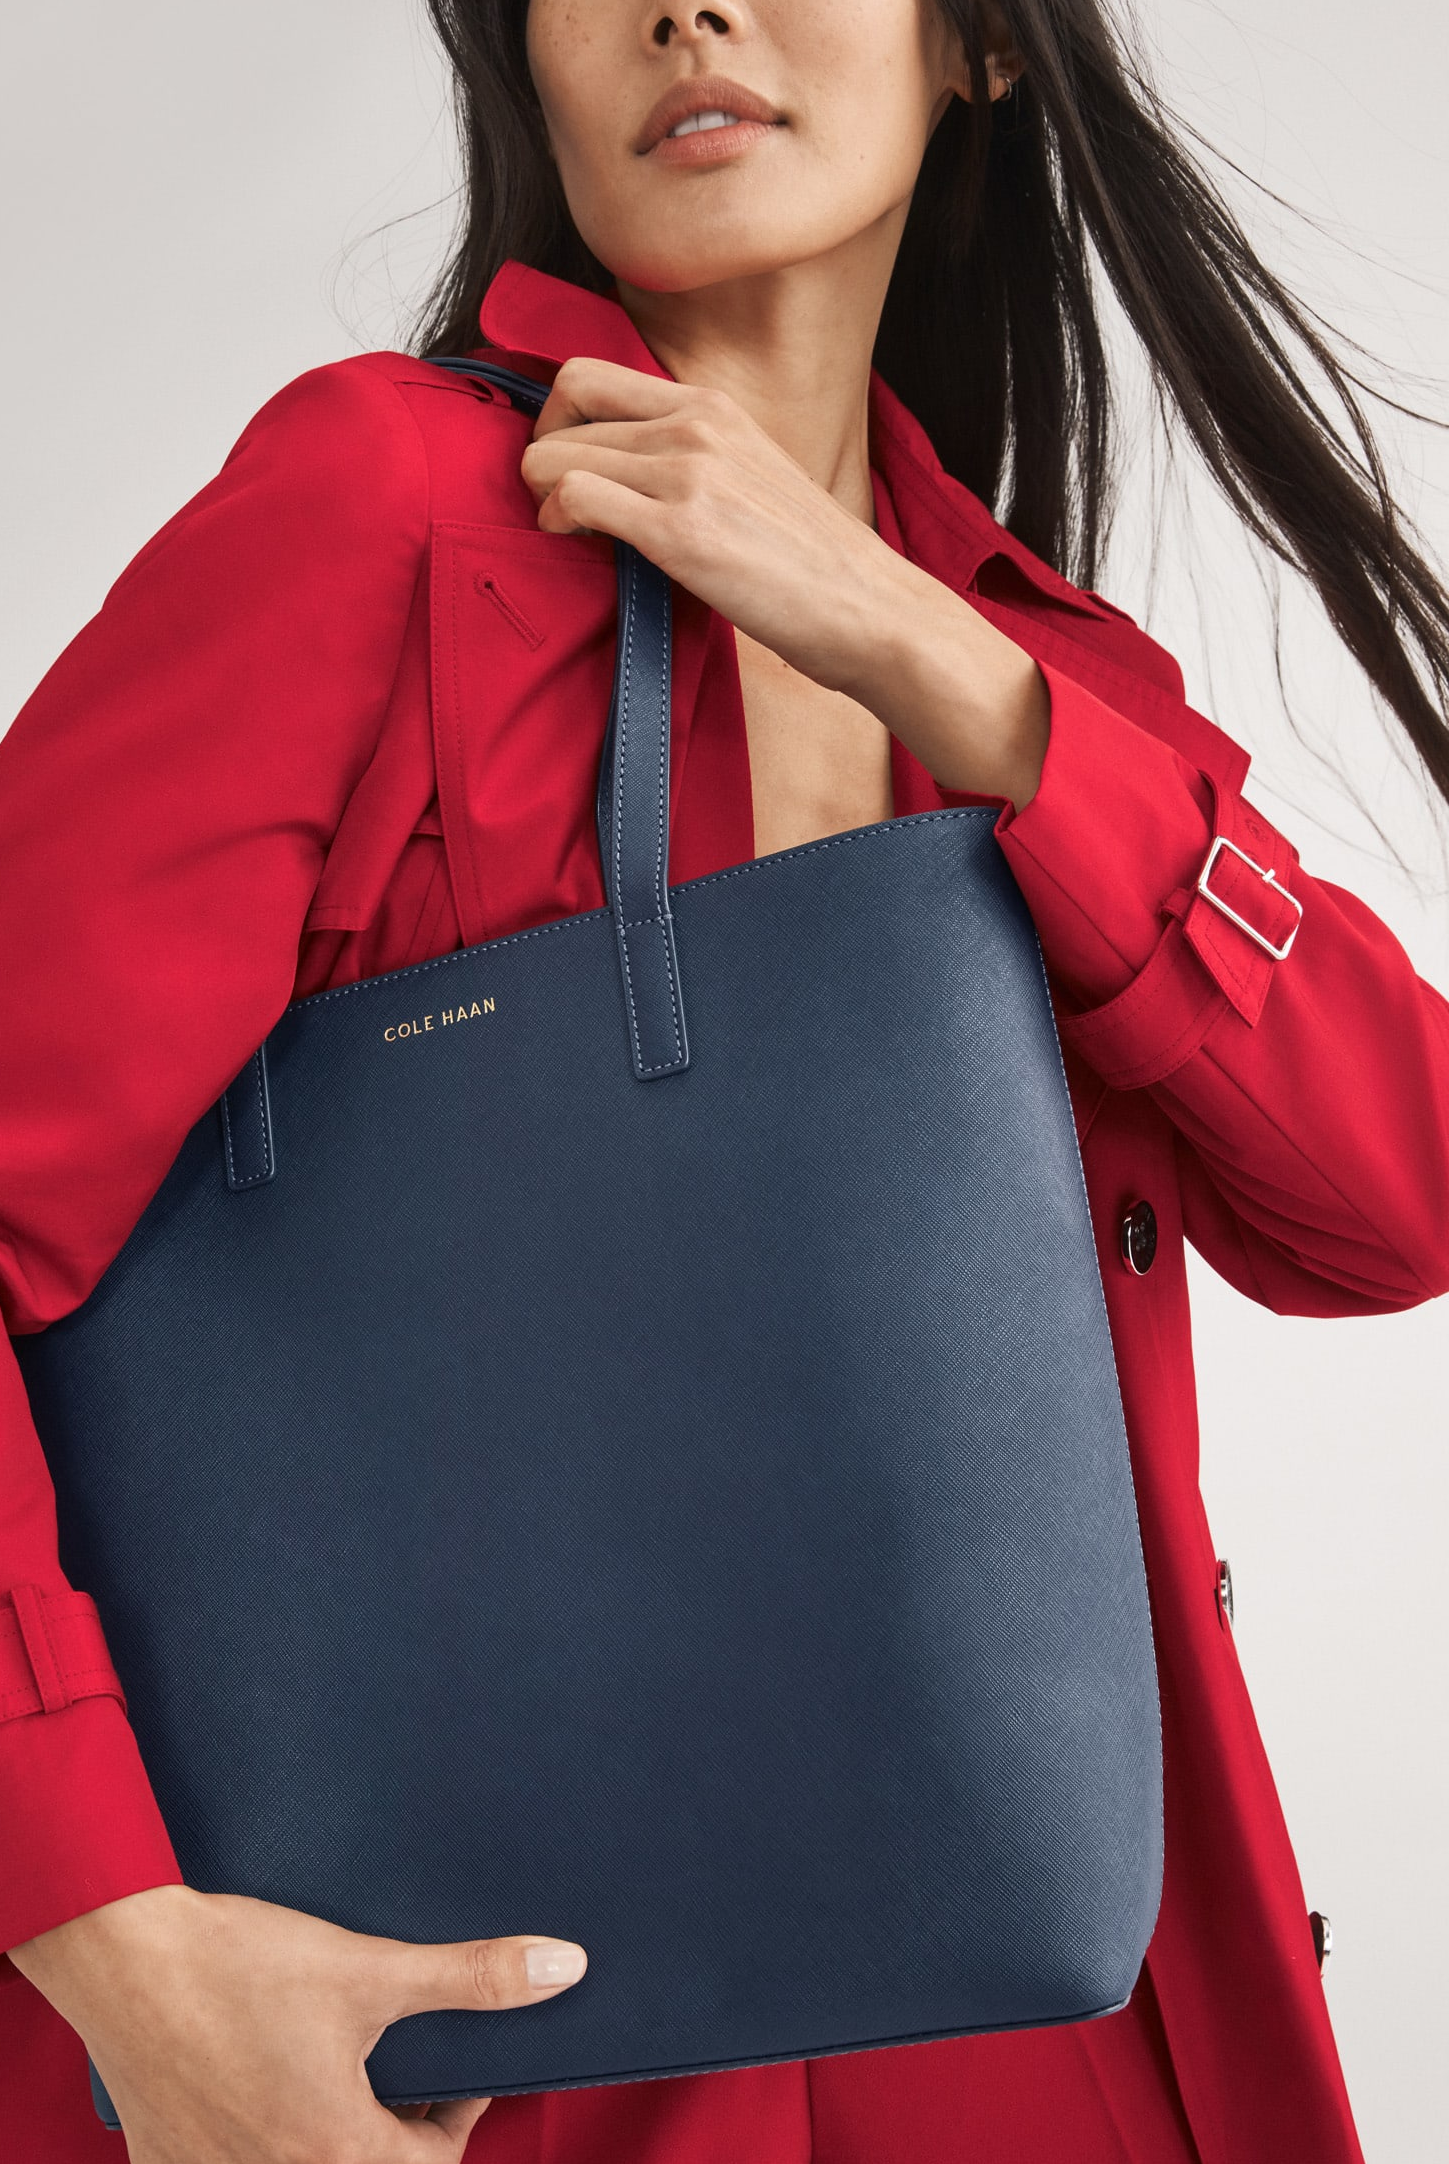 female model wearing a red trench coat with a navy tote bag on her shoulder